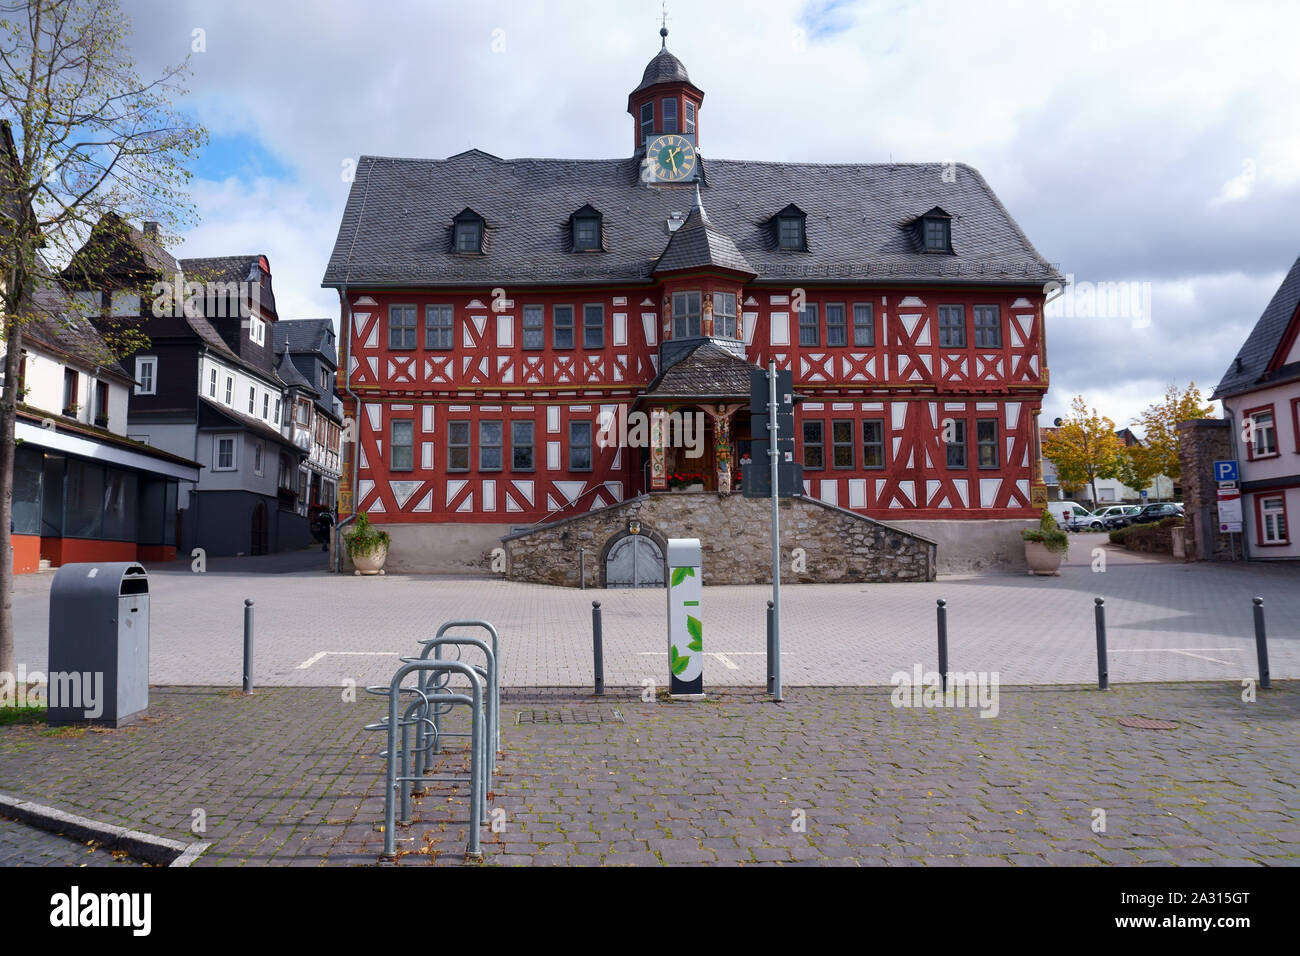 The ornate facade of the old town hall in Hadamar, a listed half-timbered house. Stock Photo